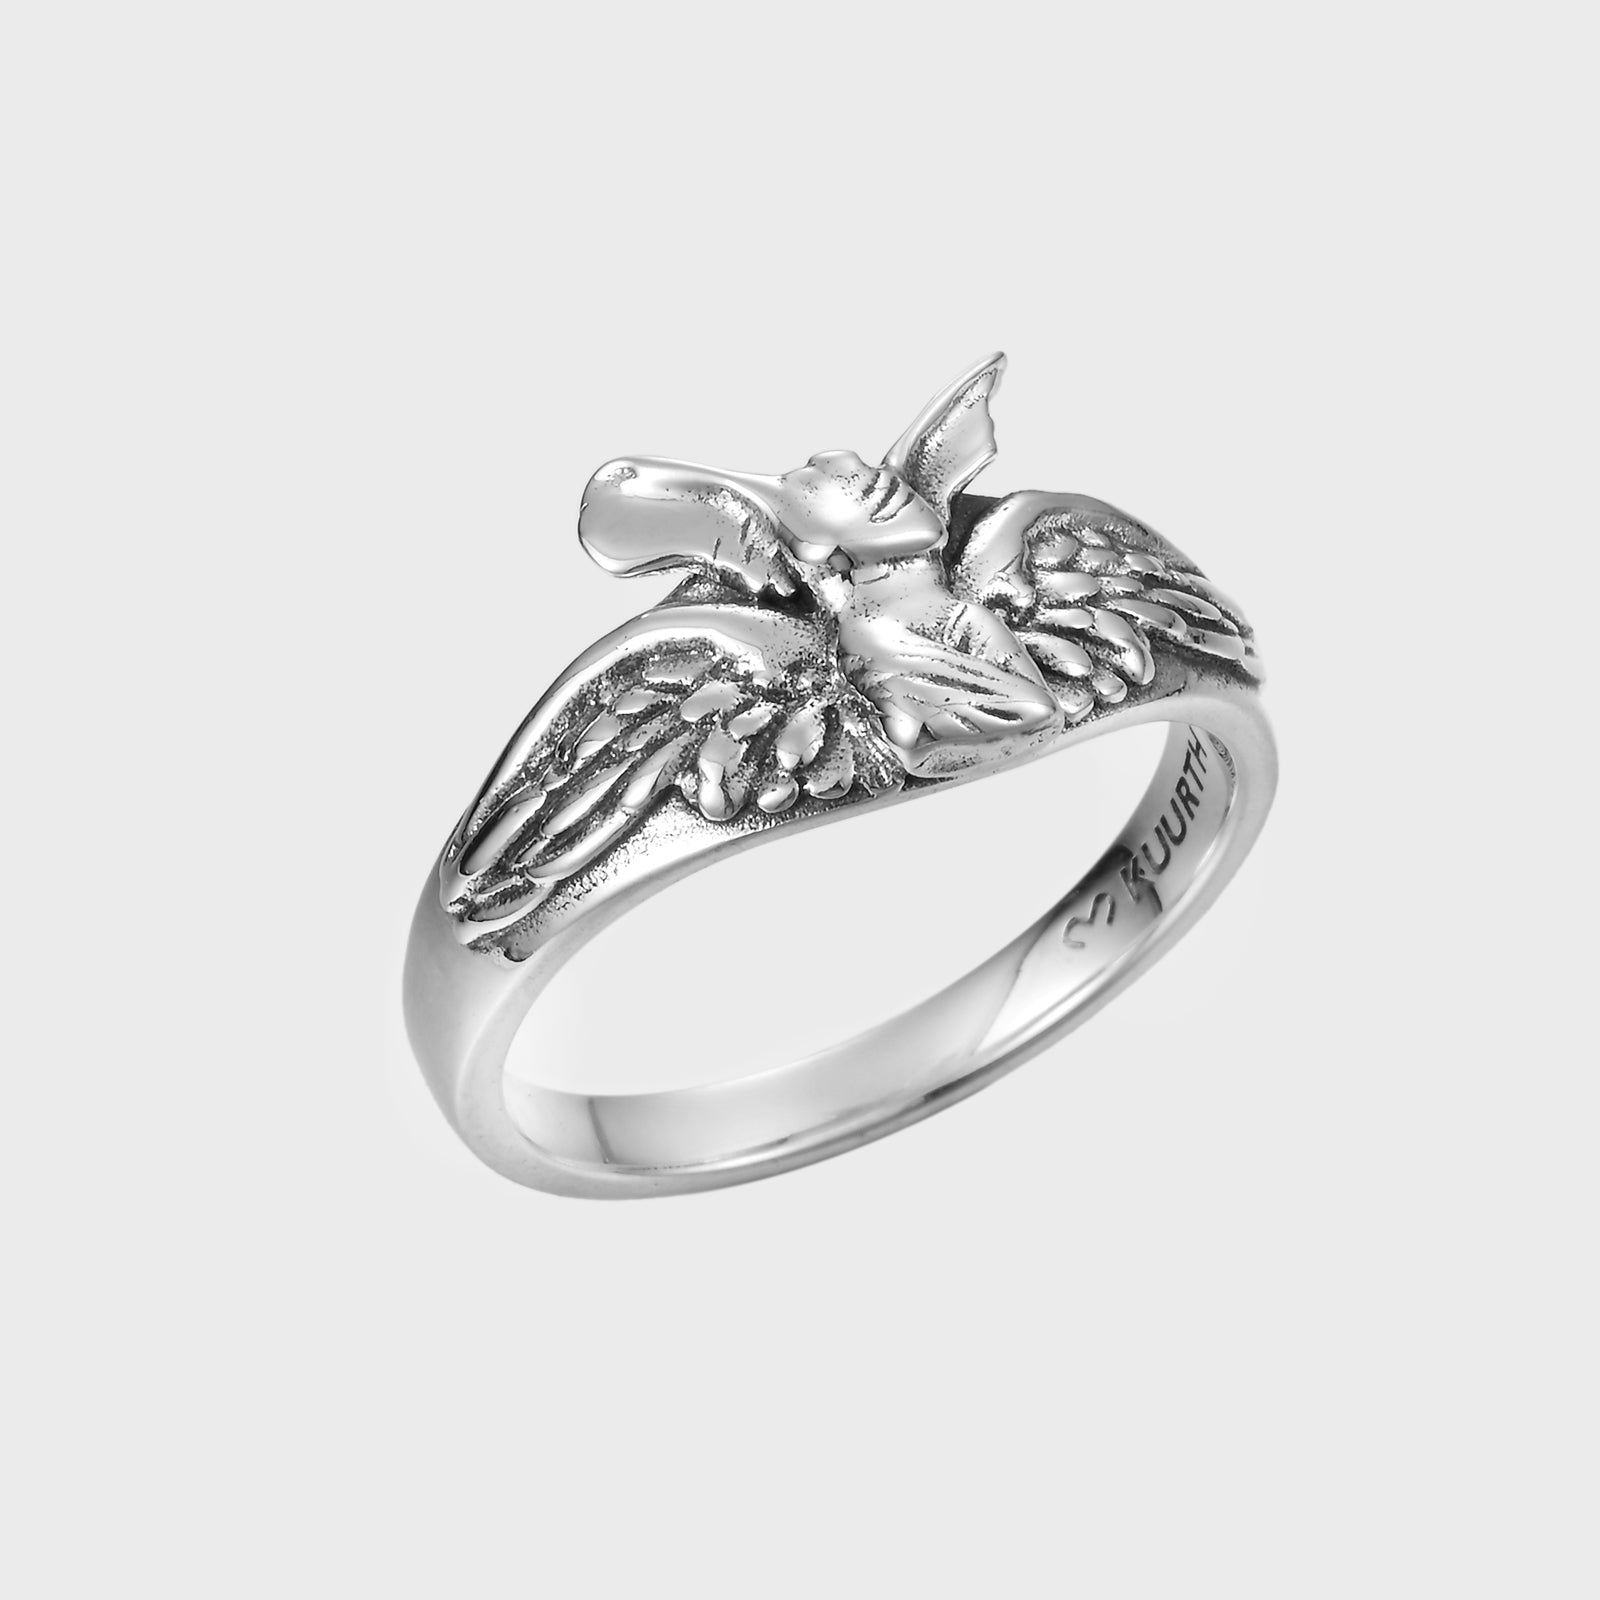 Winged Victory of Samothrace - Ring